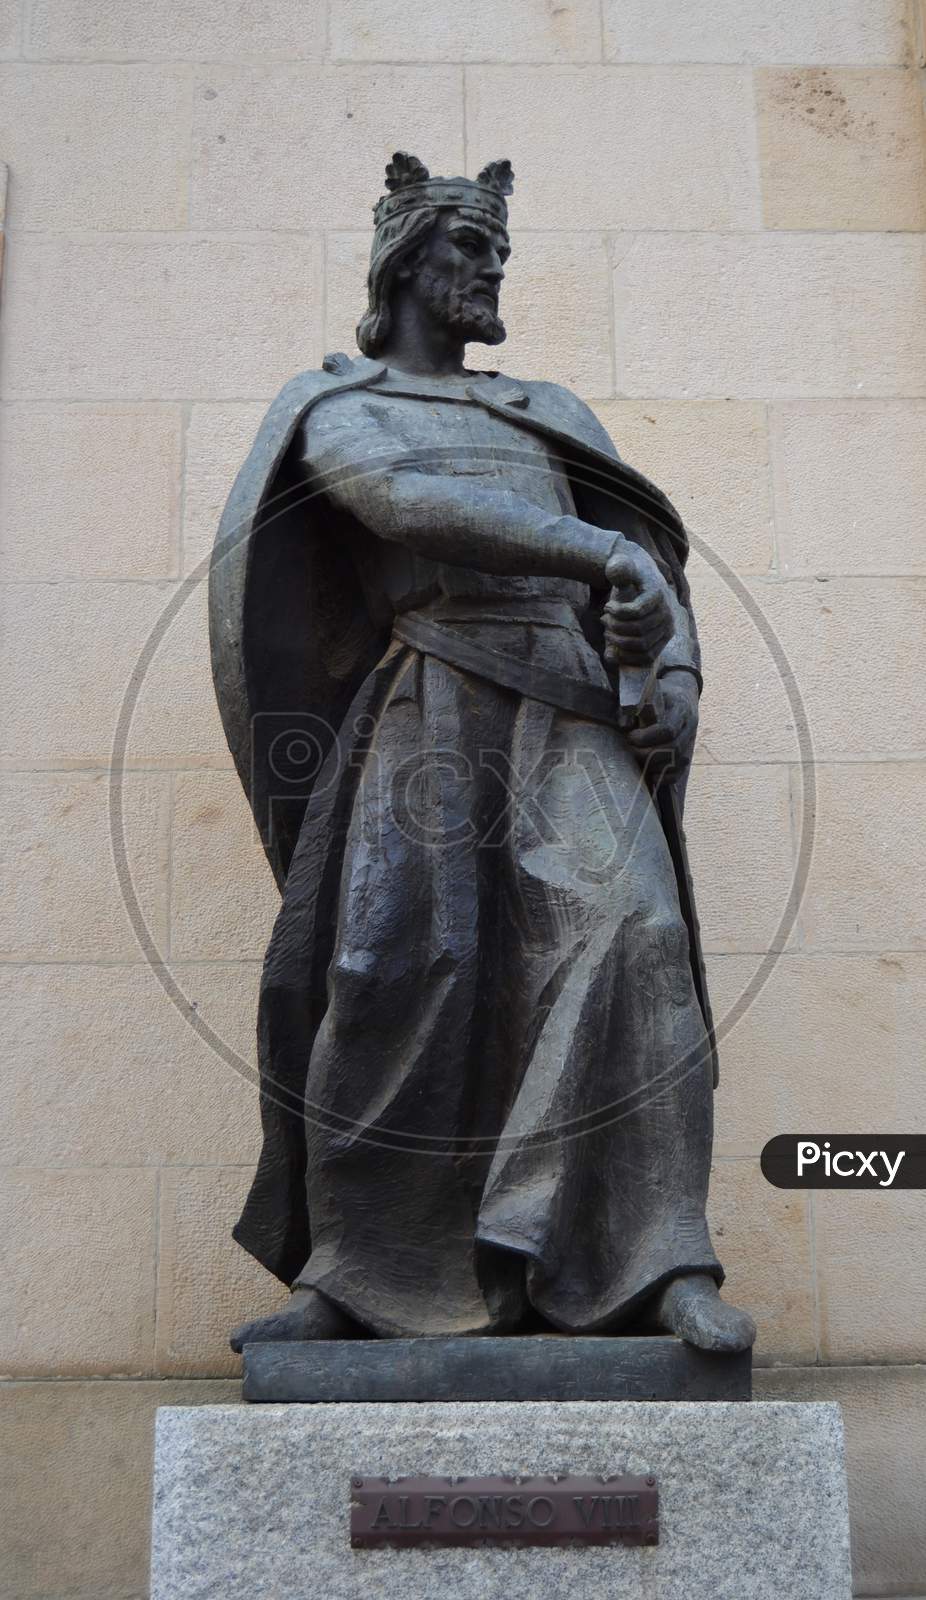 Statue In Homage To King Alfonso Viii "The Nobleman".